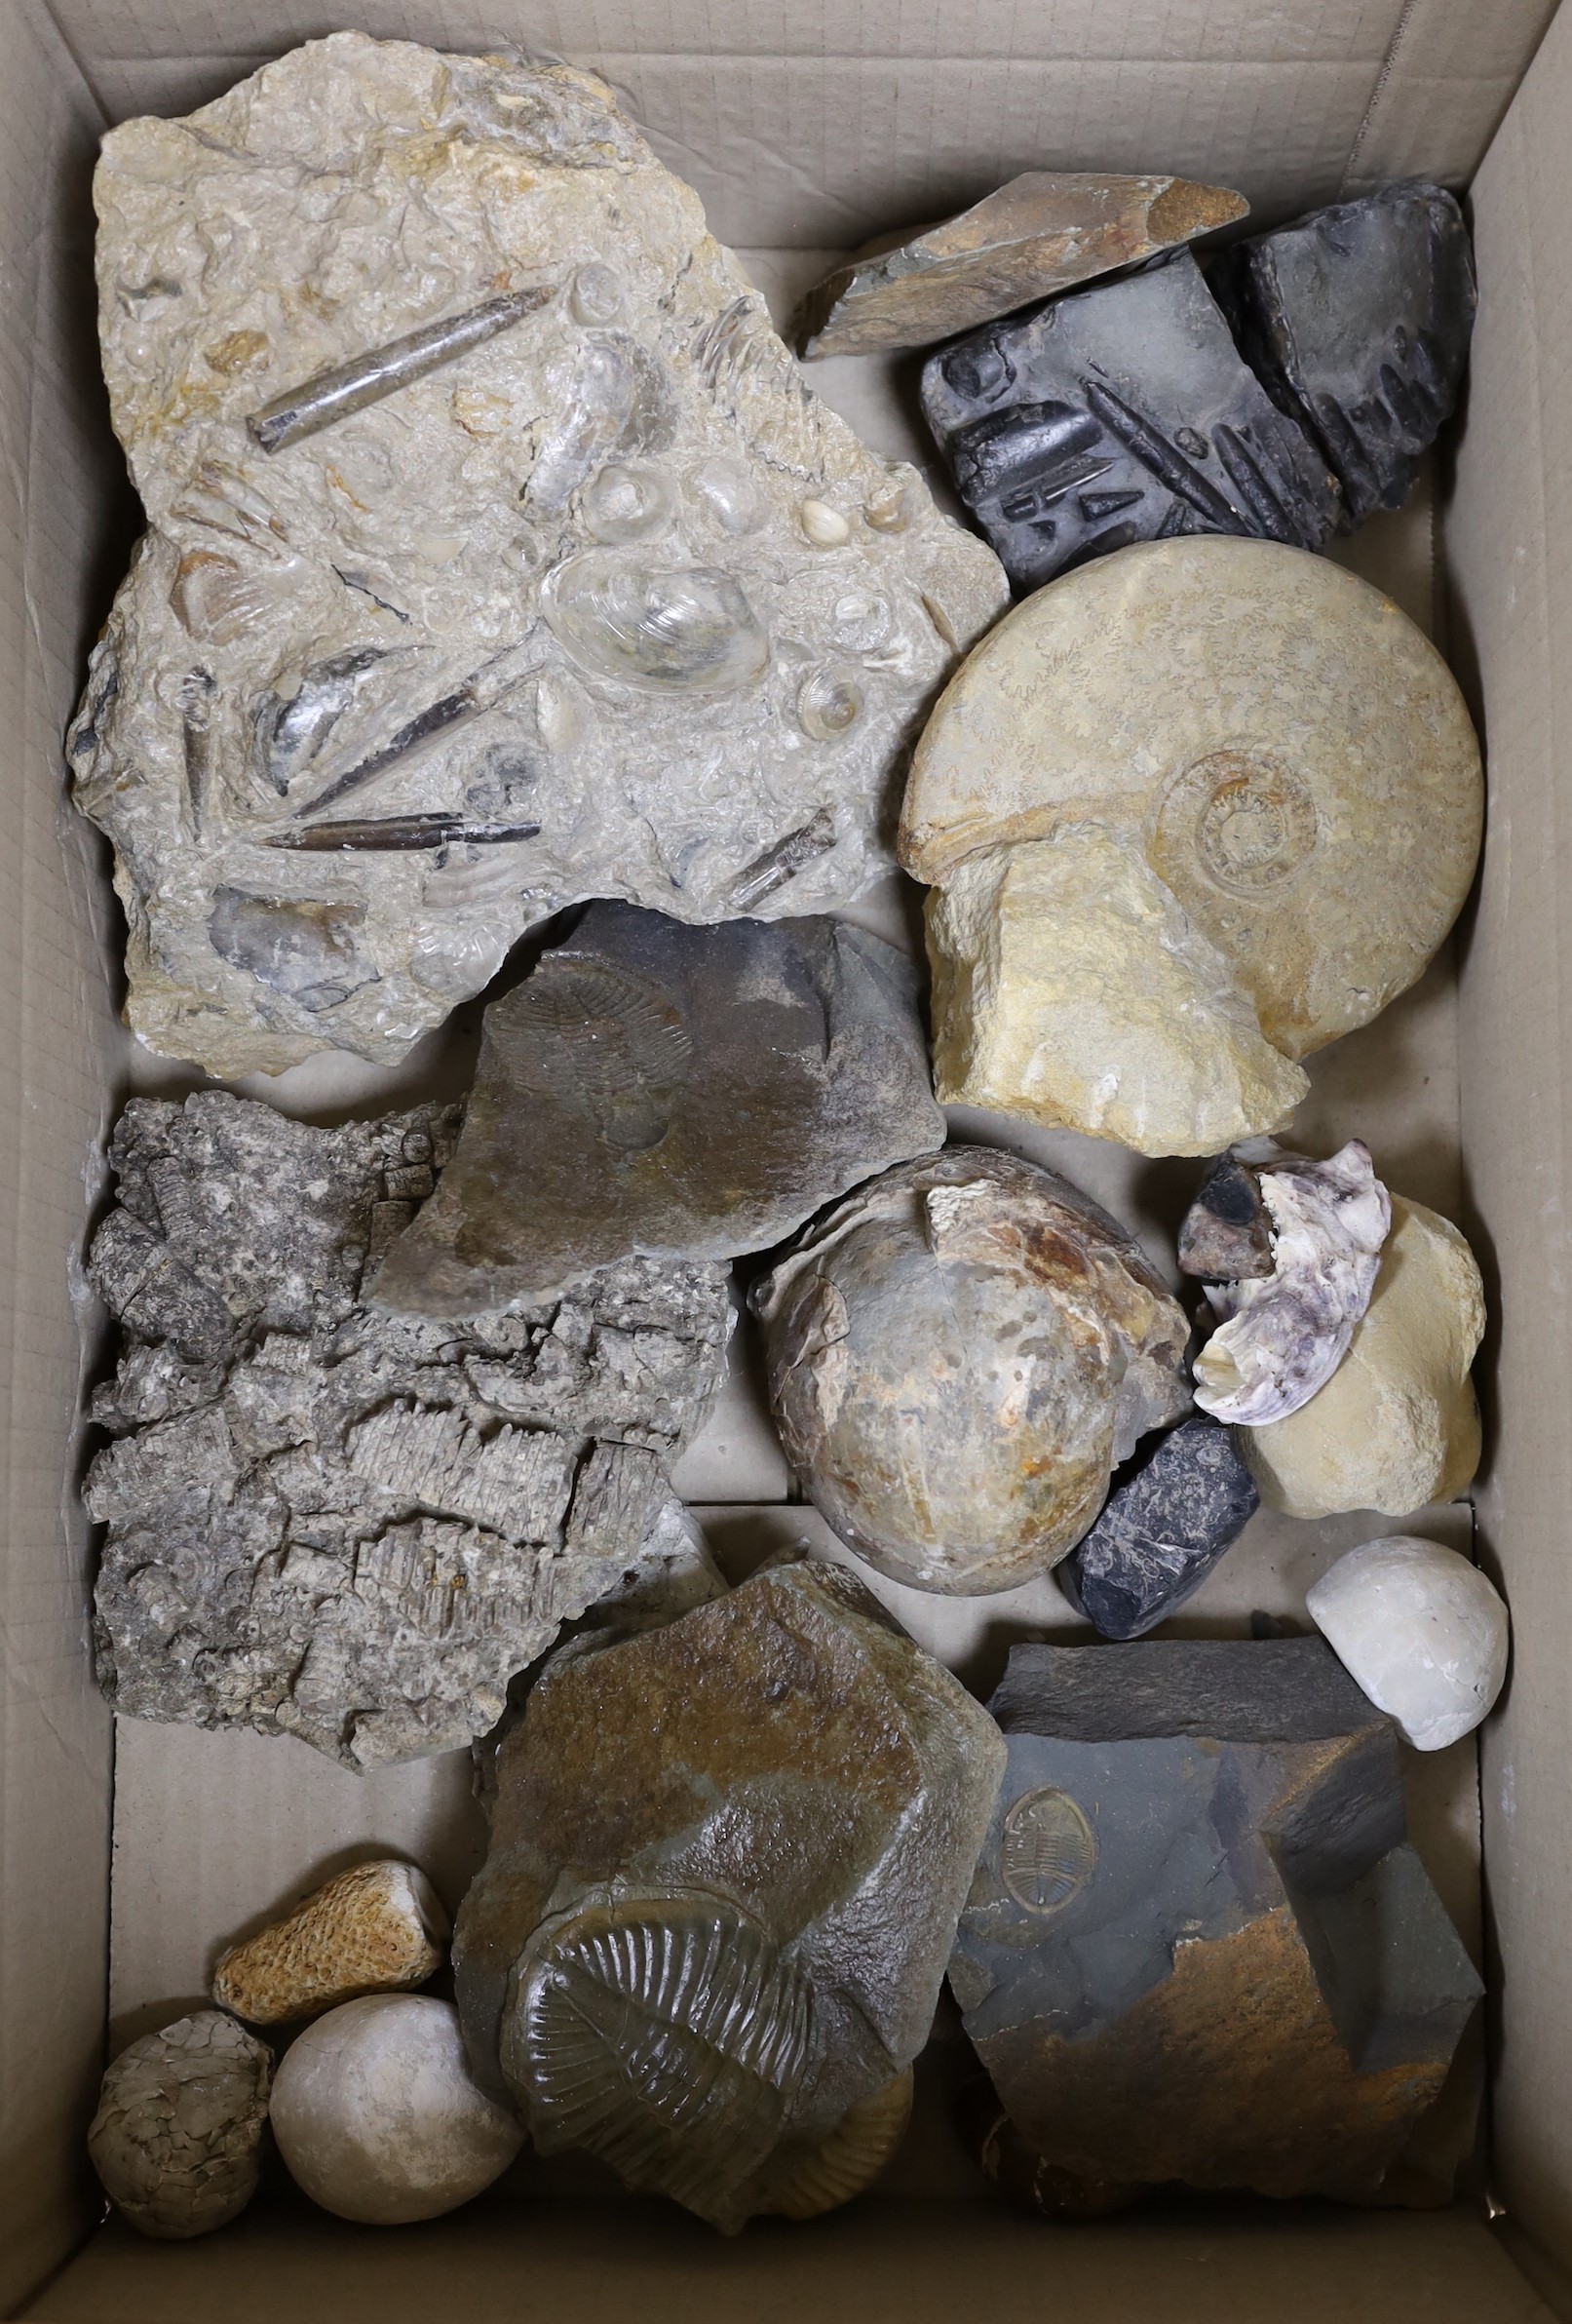 A collection of an ammonite, belemnite and other fossil specimens, the largest 23 cm across